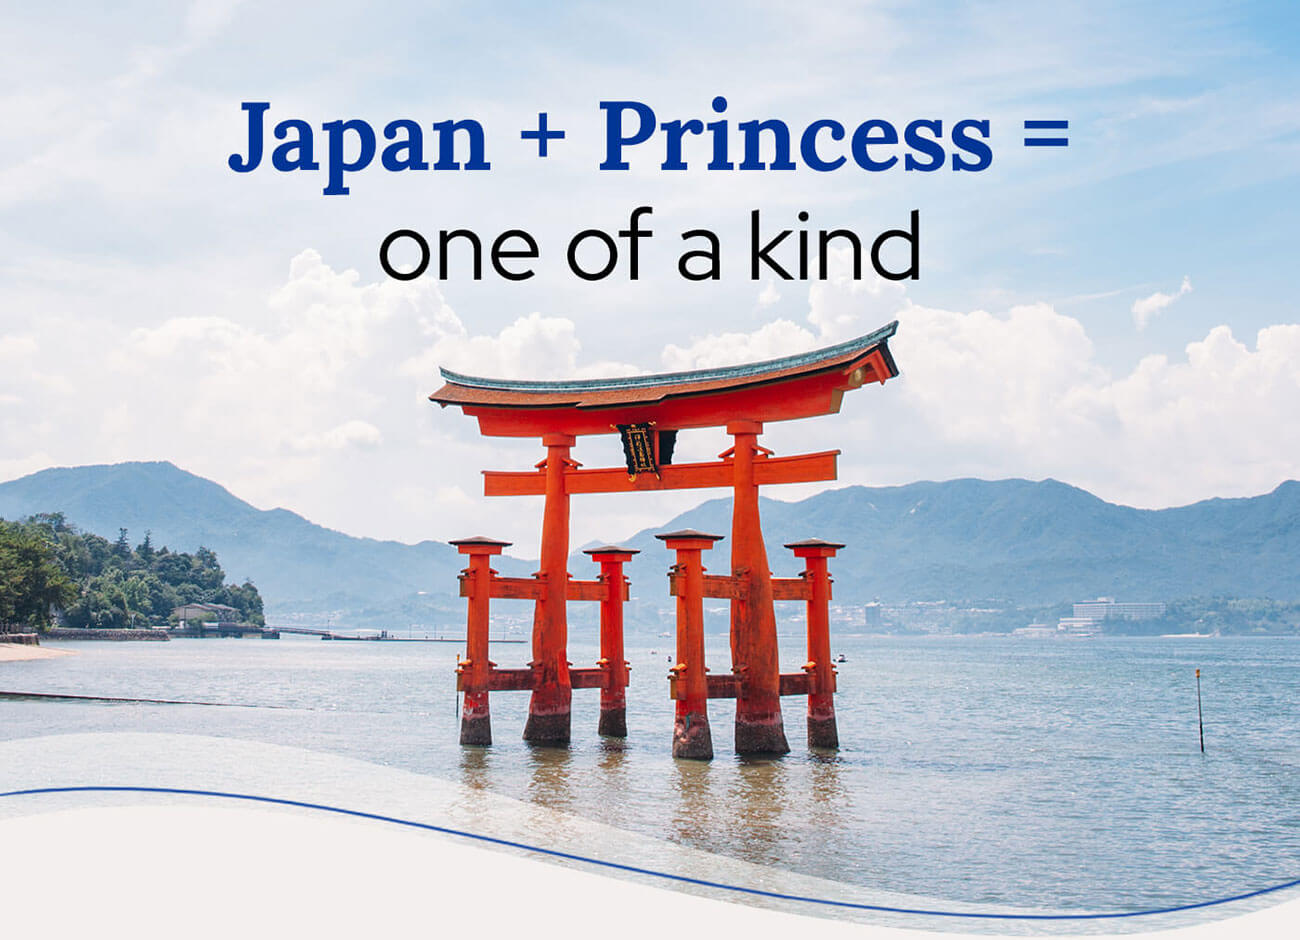 Torii Gate - Your clients will love Japan with Princess